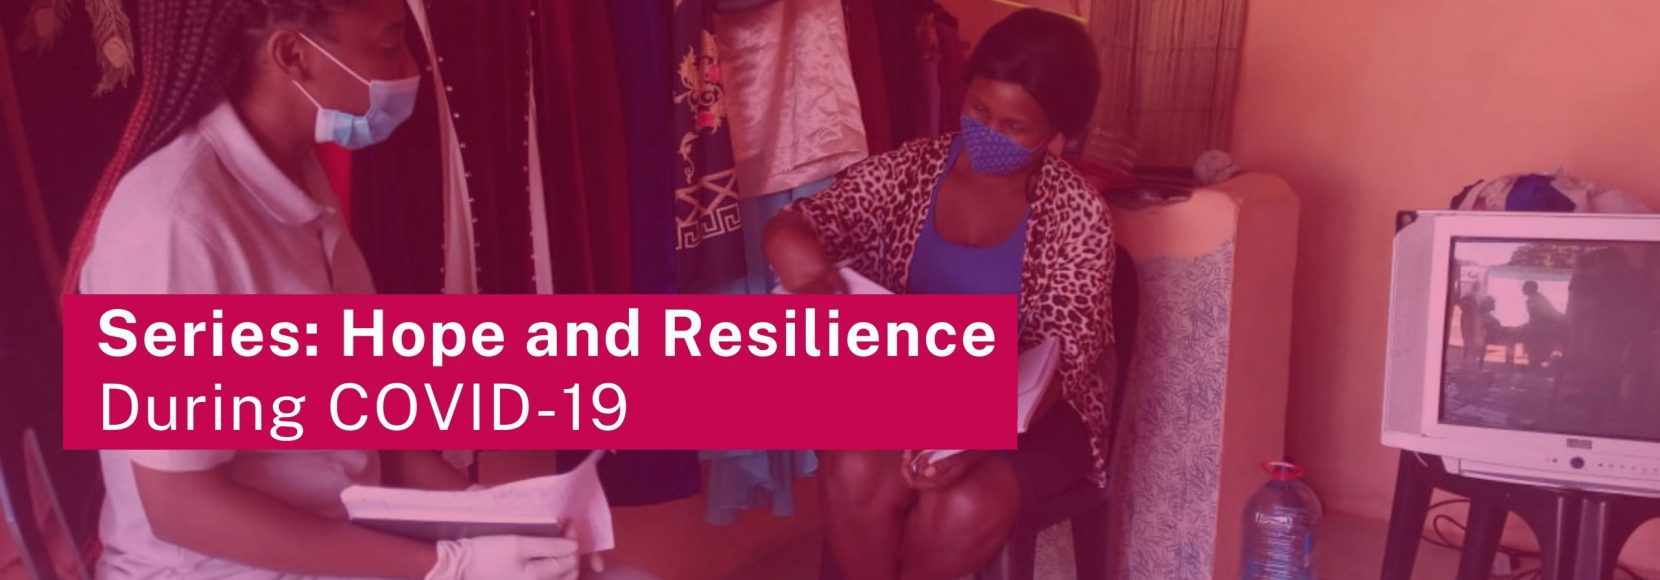 hope and resilience during covid-19 part 3